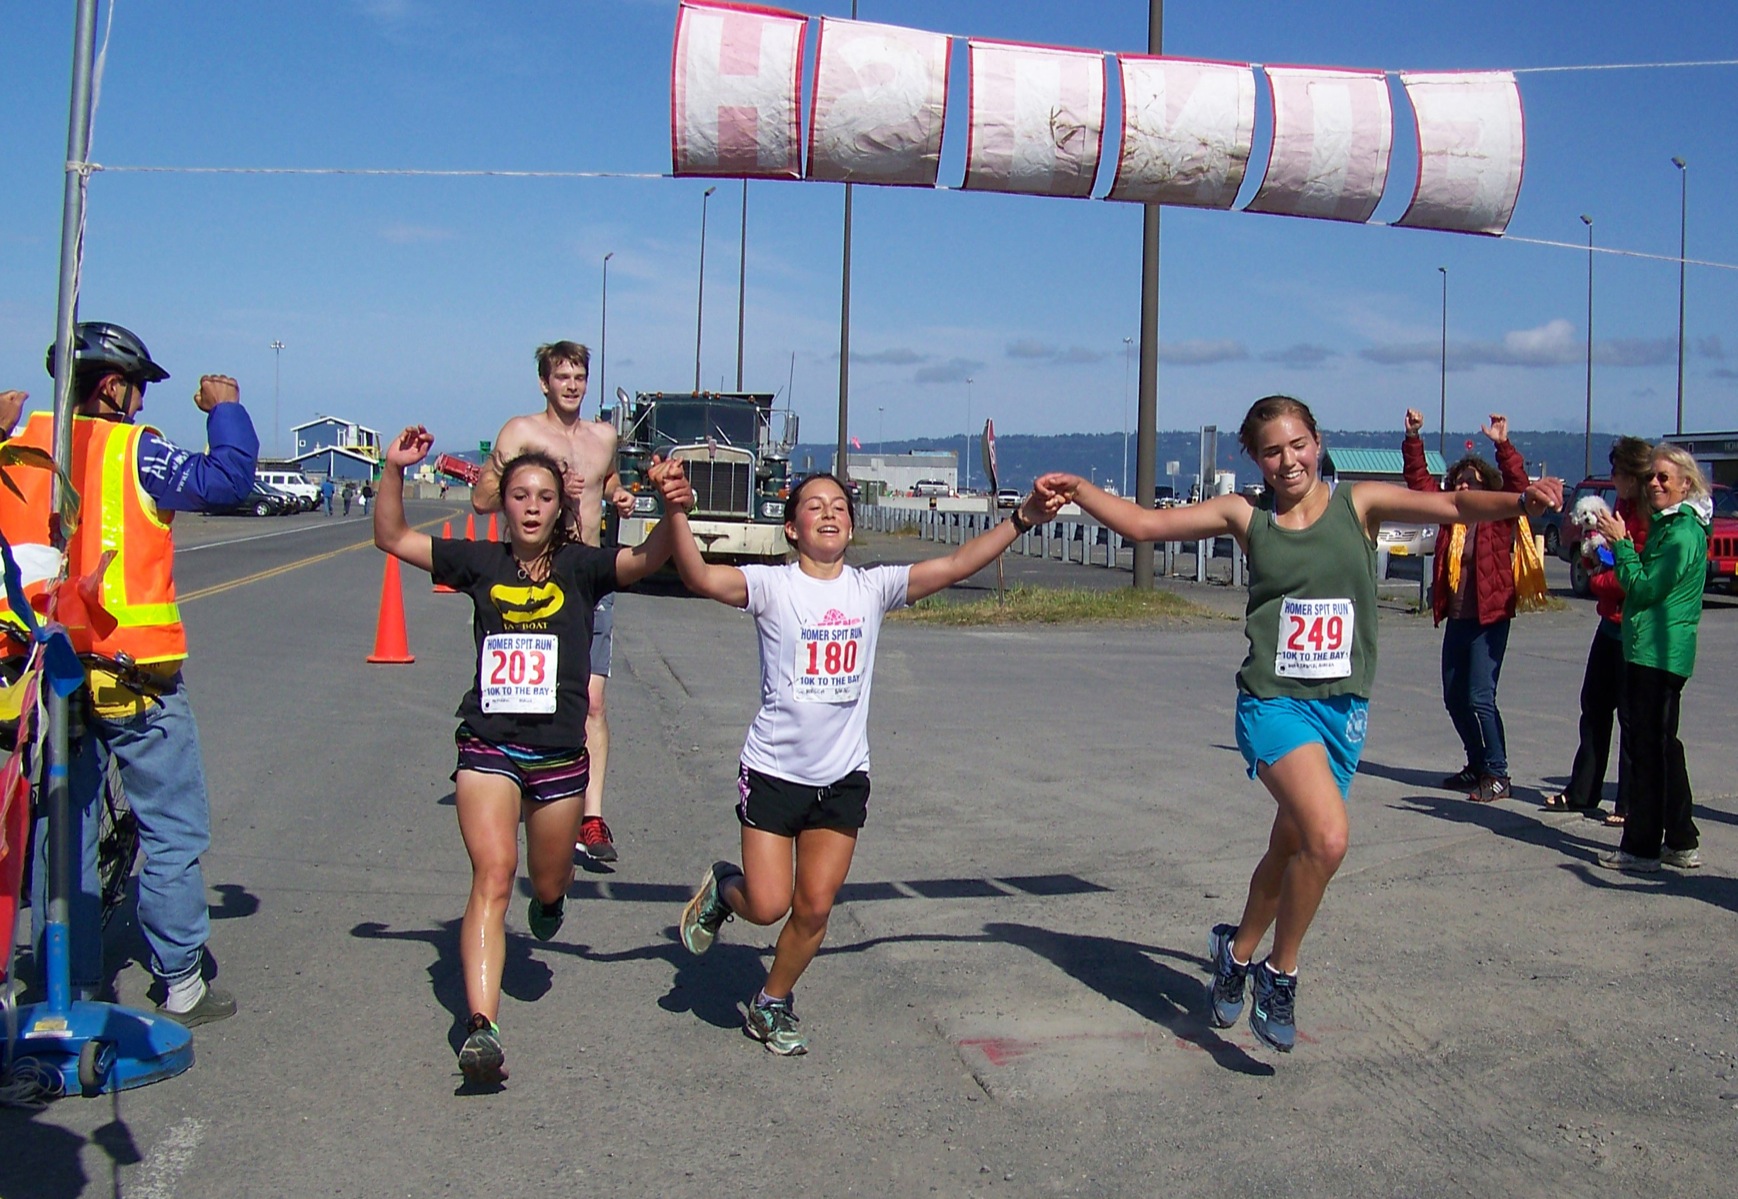 The first women to finish in today's 10K Run for the Bay Homer Spit Run are, from left, Molly Mitchell, Barae Hirsch and Aurora Waclawski. They finished with a time of 43:30-McKibben Jackinsky